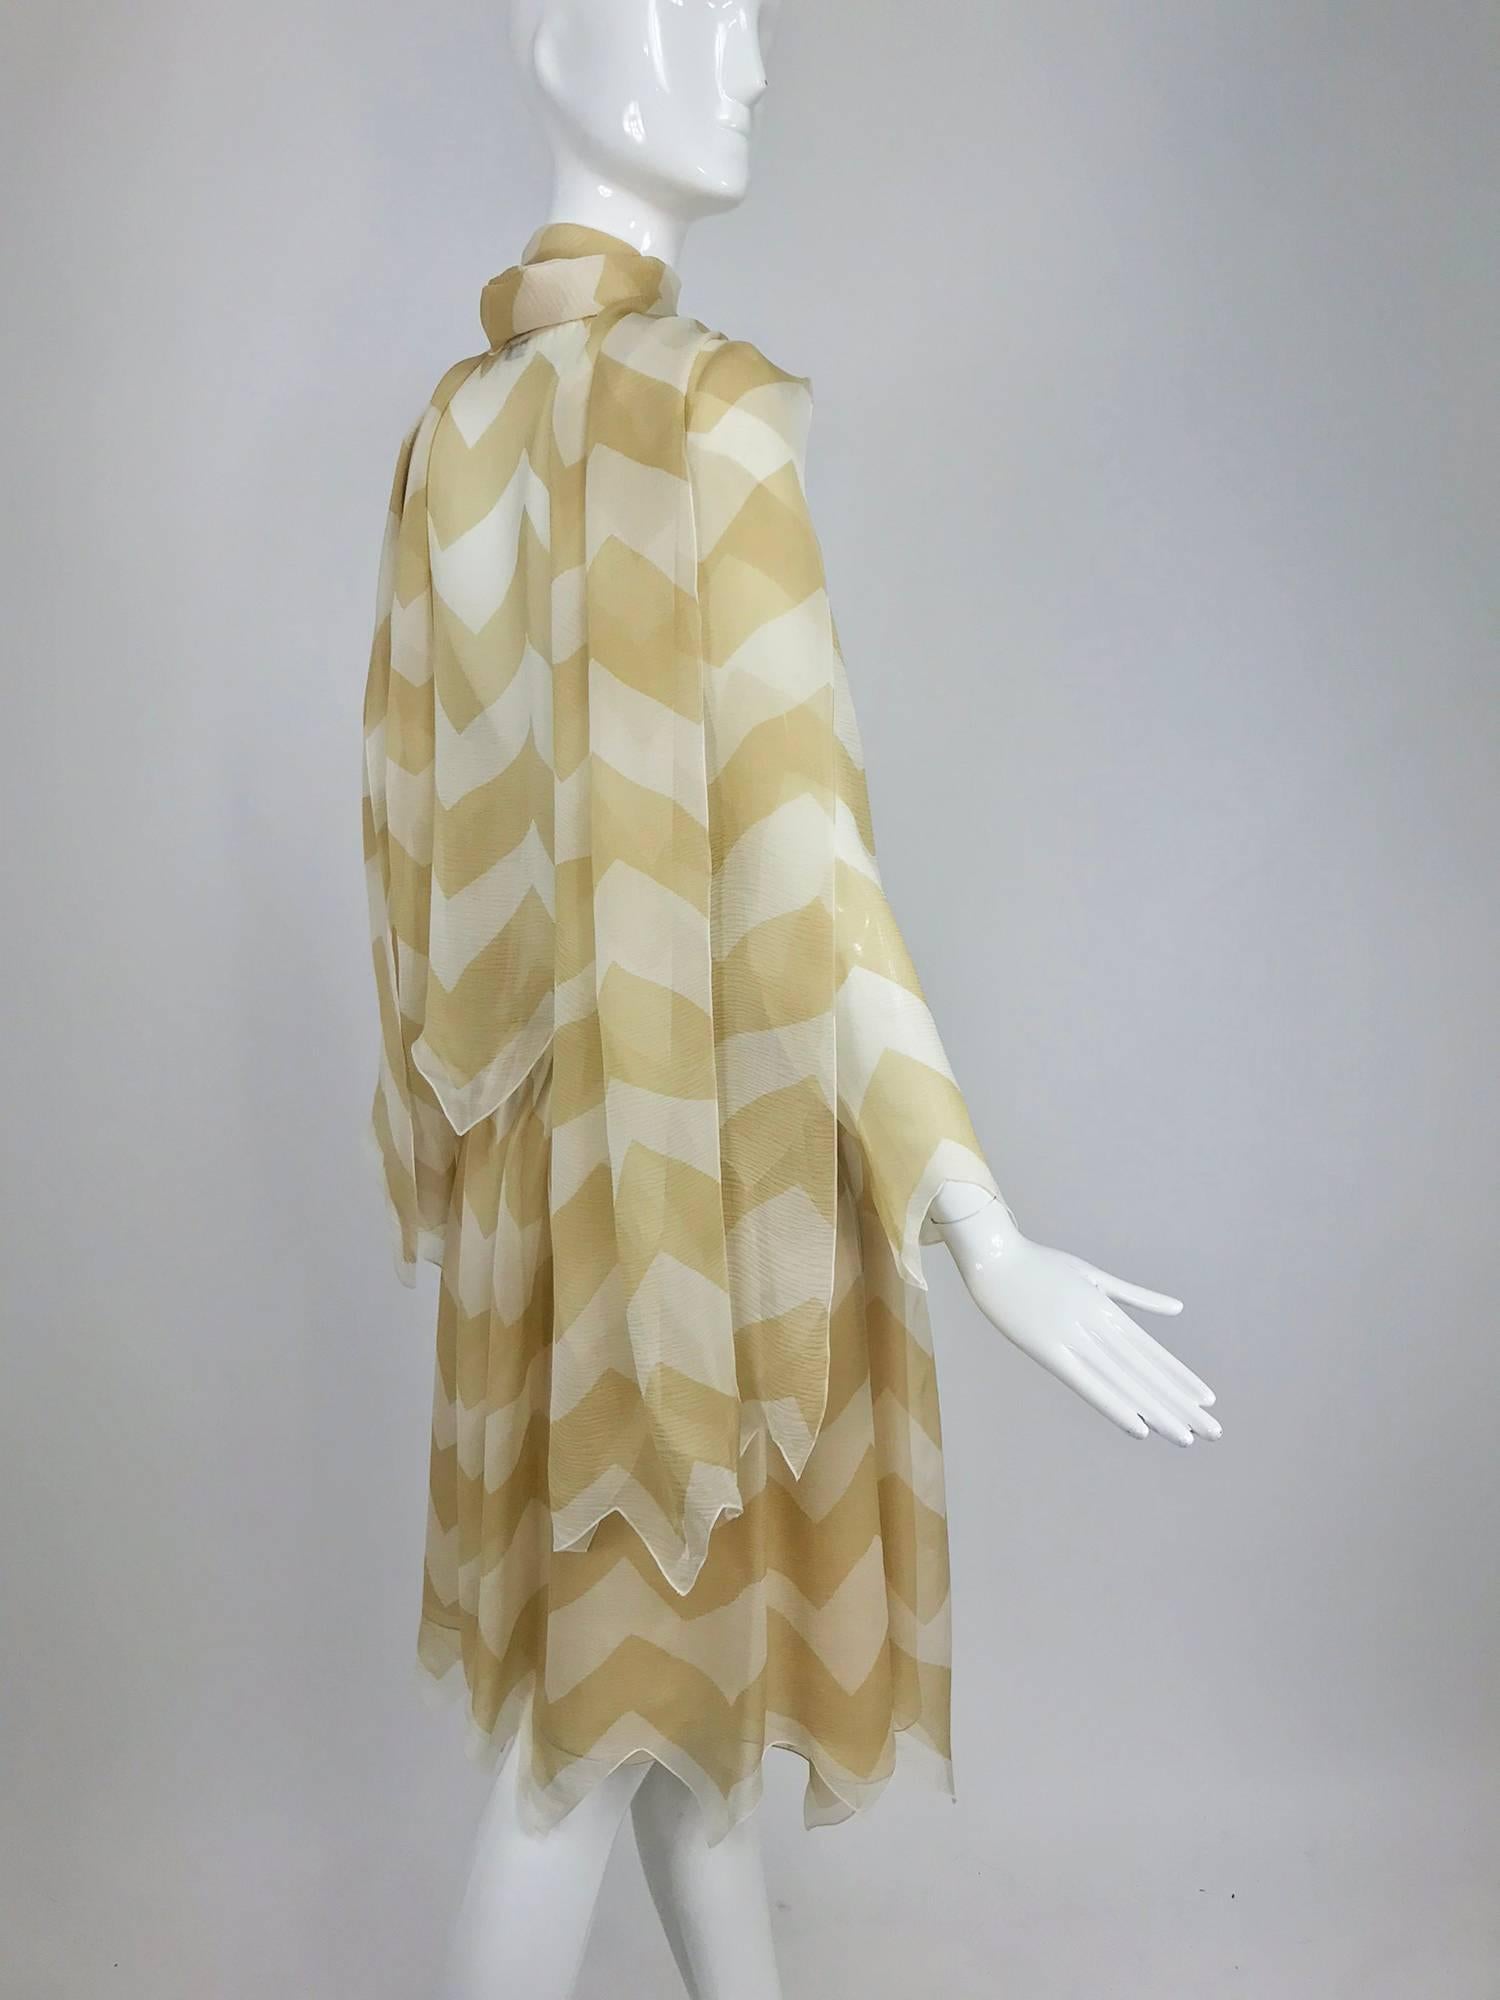 Chanel tan and cream silk chiffon zig zag pattern blouse and skirt 2000A...Sheer blouse is unlined, long sleeves with zig zag cuffs...Blouse buttons at the front with mother of pearl buttons, long and wide attached neck ties, will work as a shawl or